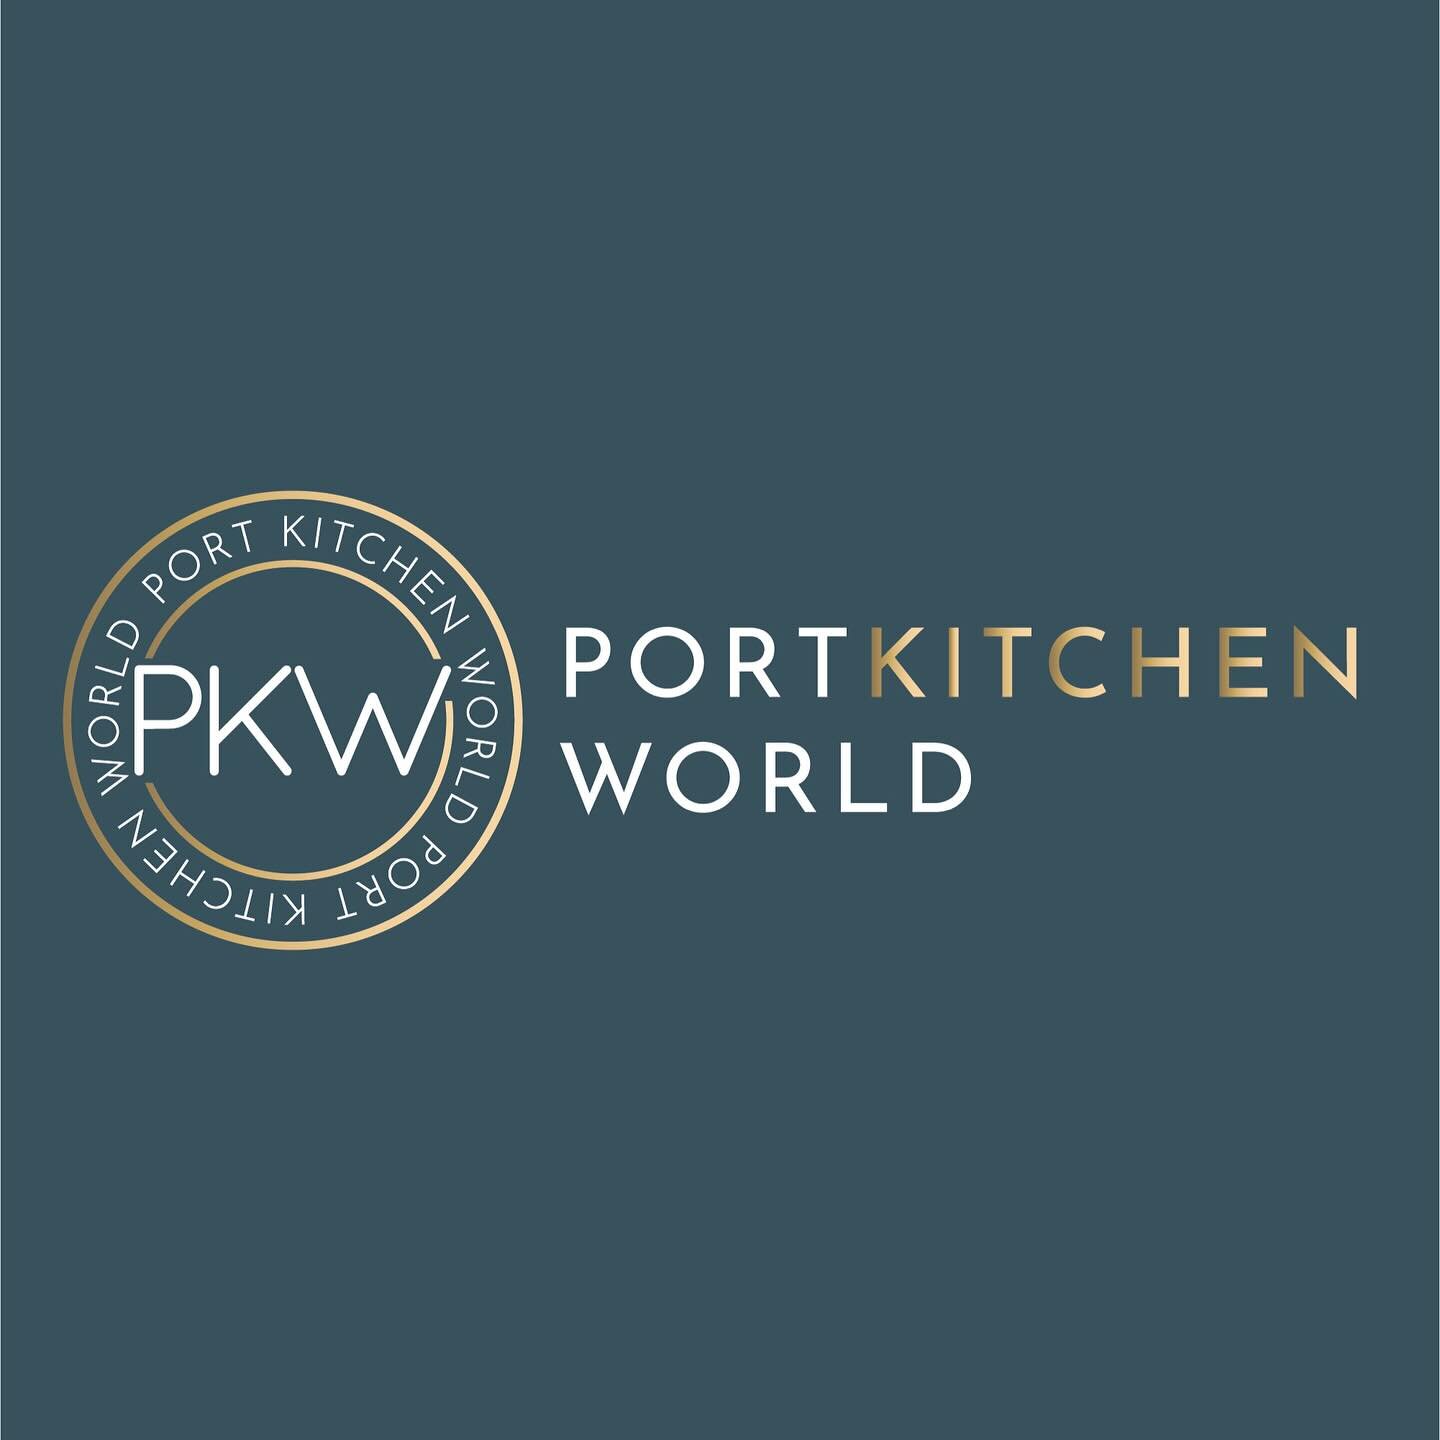 𝗣𝗢𝗥𝗧 𝗞𝗜𝗧𝗖𝗛𝗘𝗡 𝗪𝗢𝗥𝗟𝗗 ✨

I was so excited when the lovely Nik from @portkitchenworld messaged me to help her with some new branding! We worked very closely to create this modern, luxurious branding and I&rsquo;m over the moon with the ou